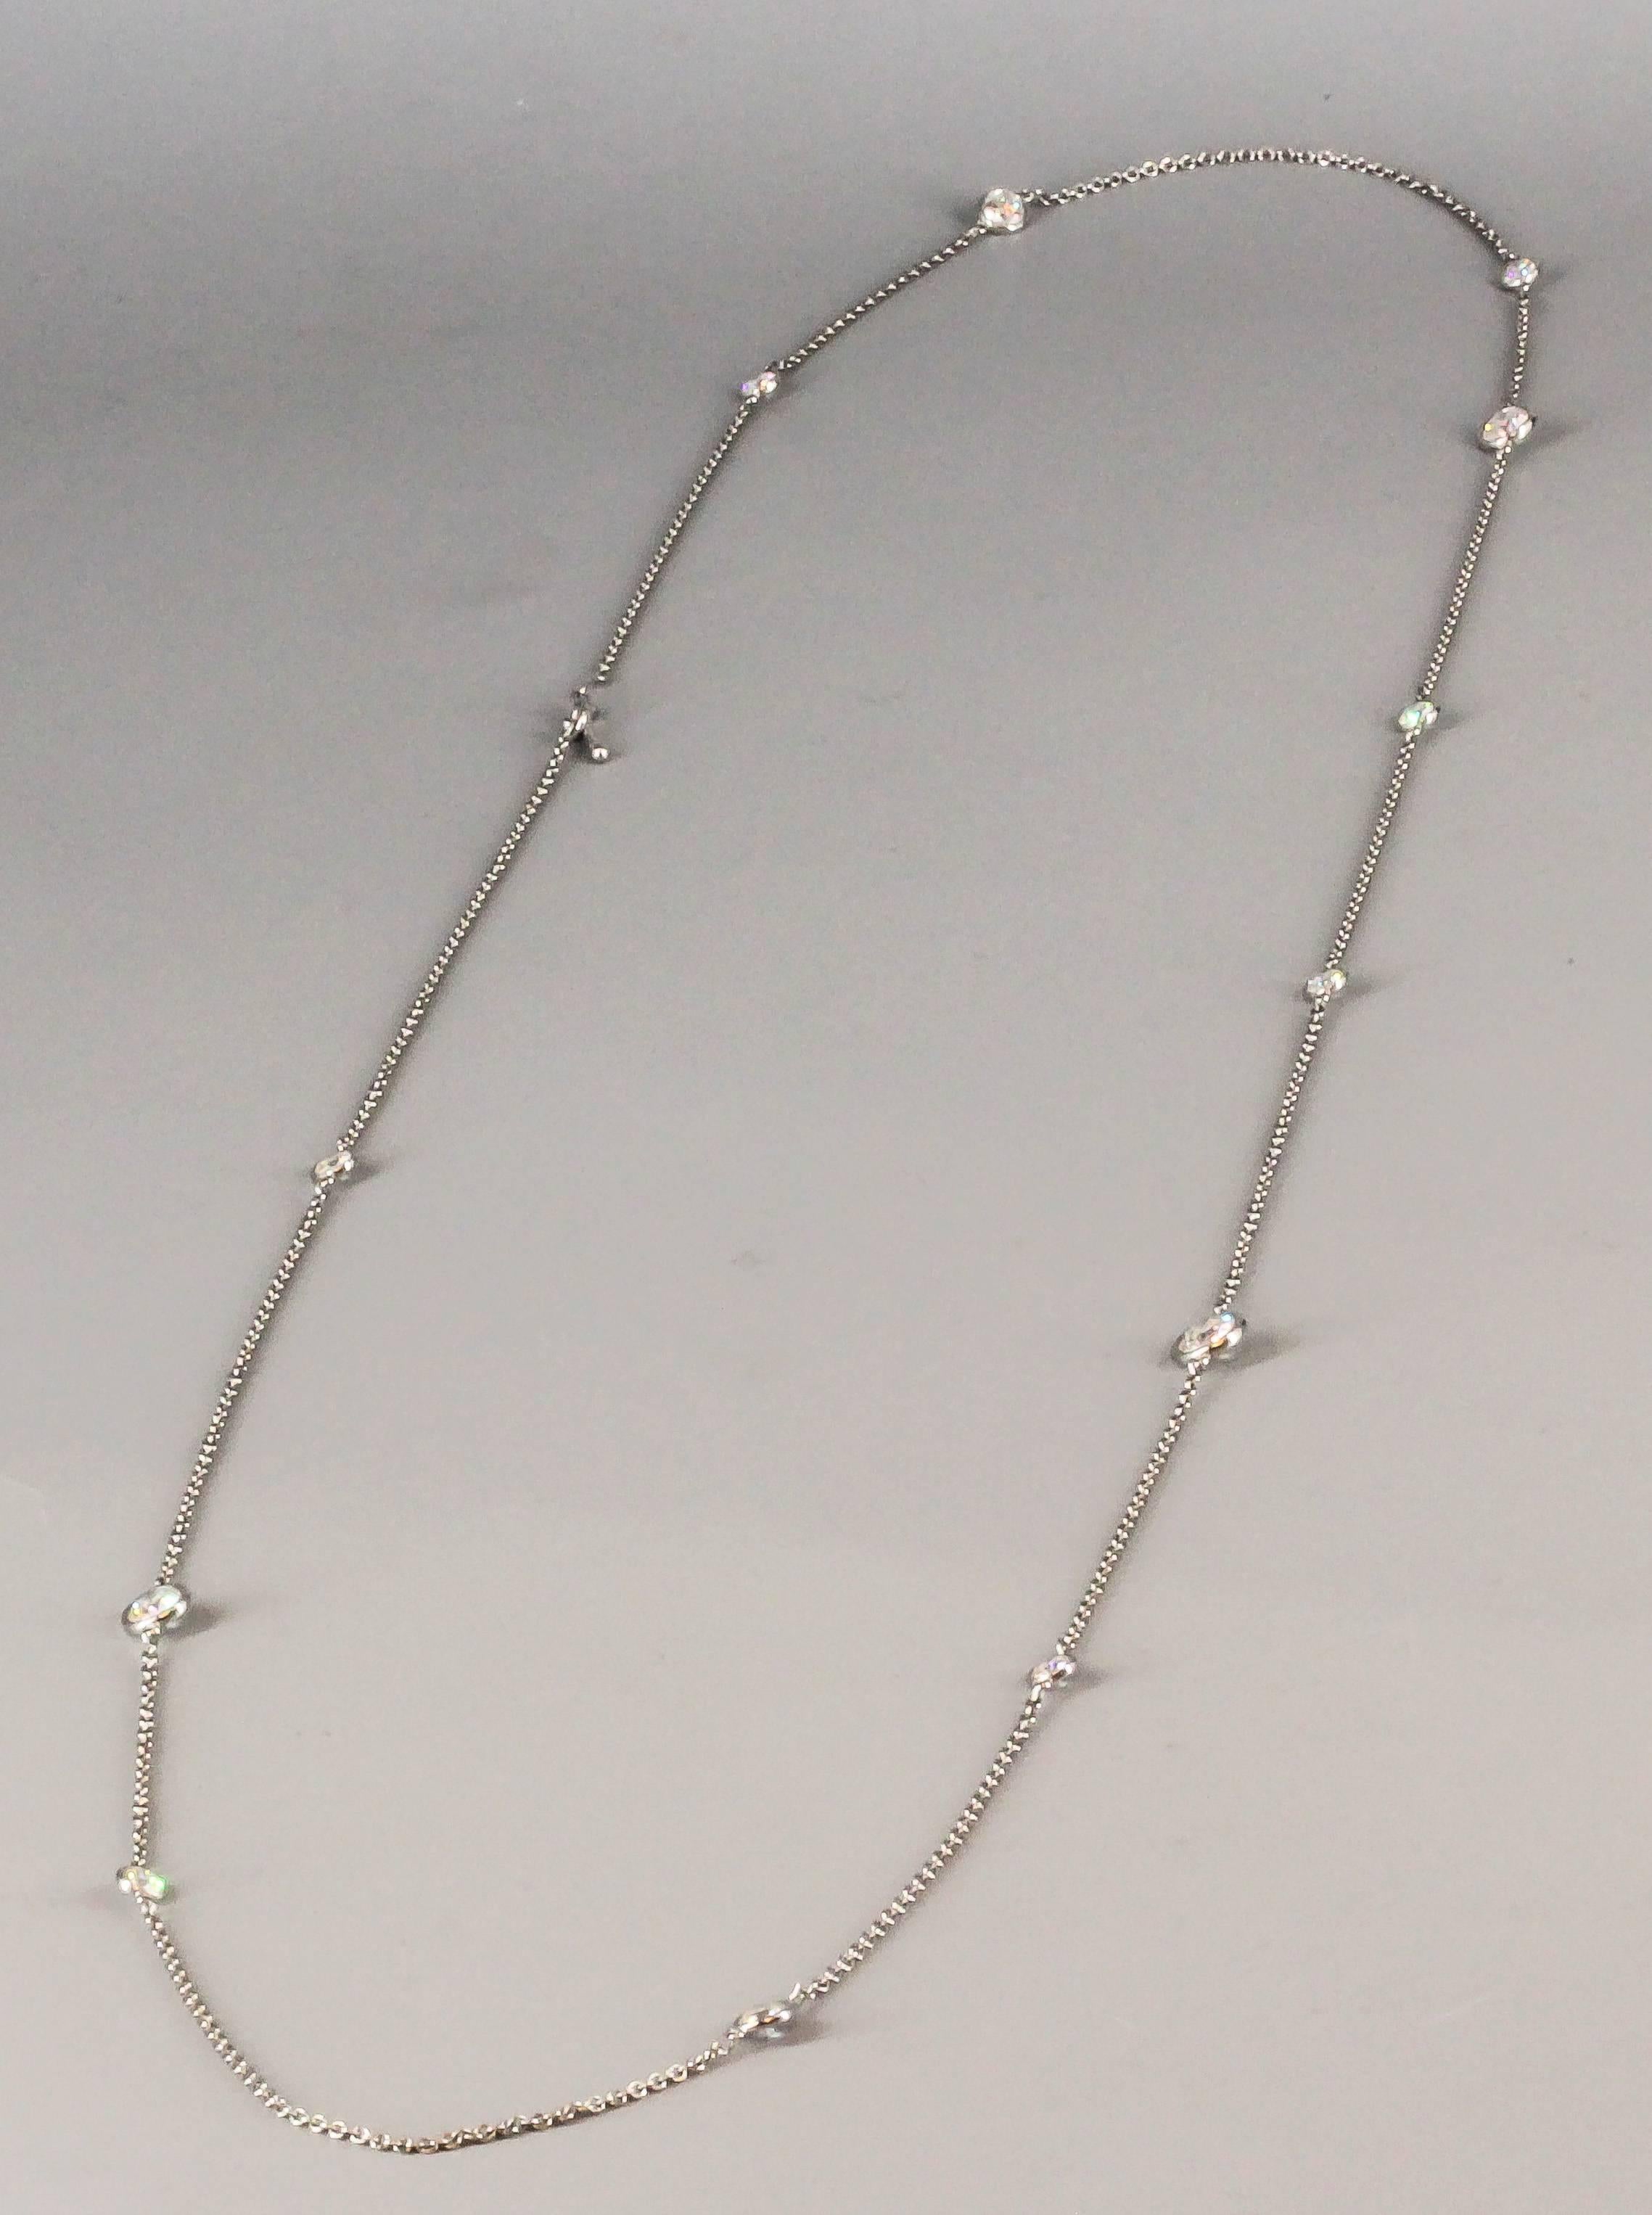 Timeless diamond and platinum necklace from the 